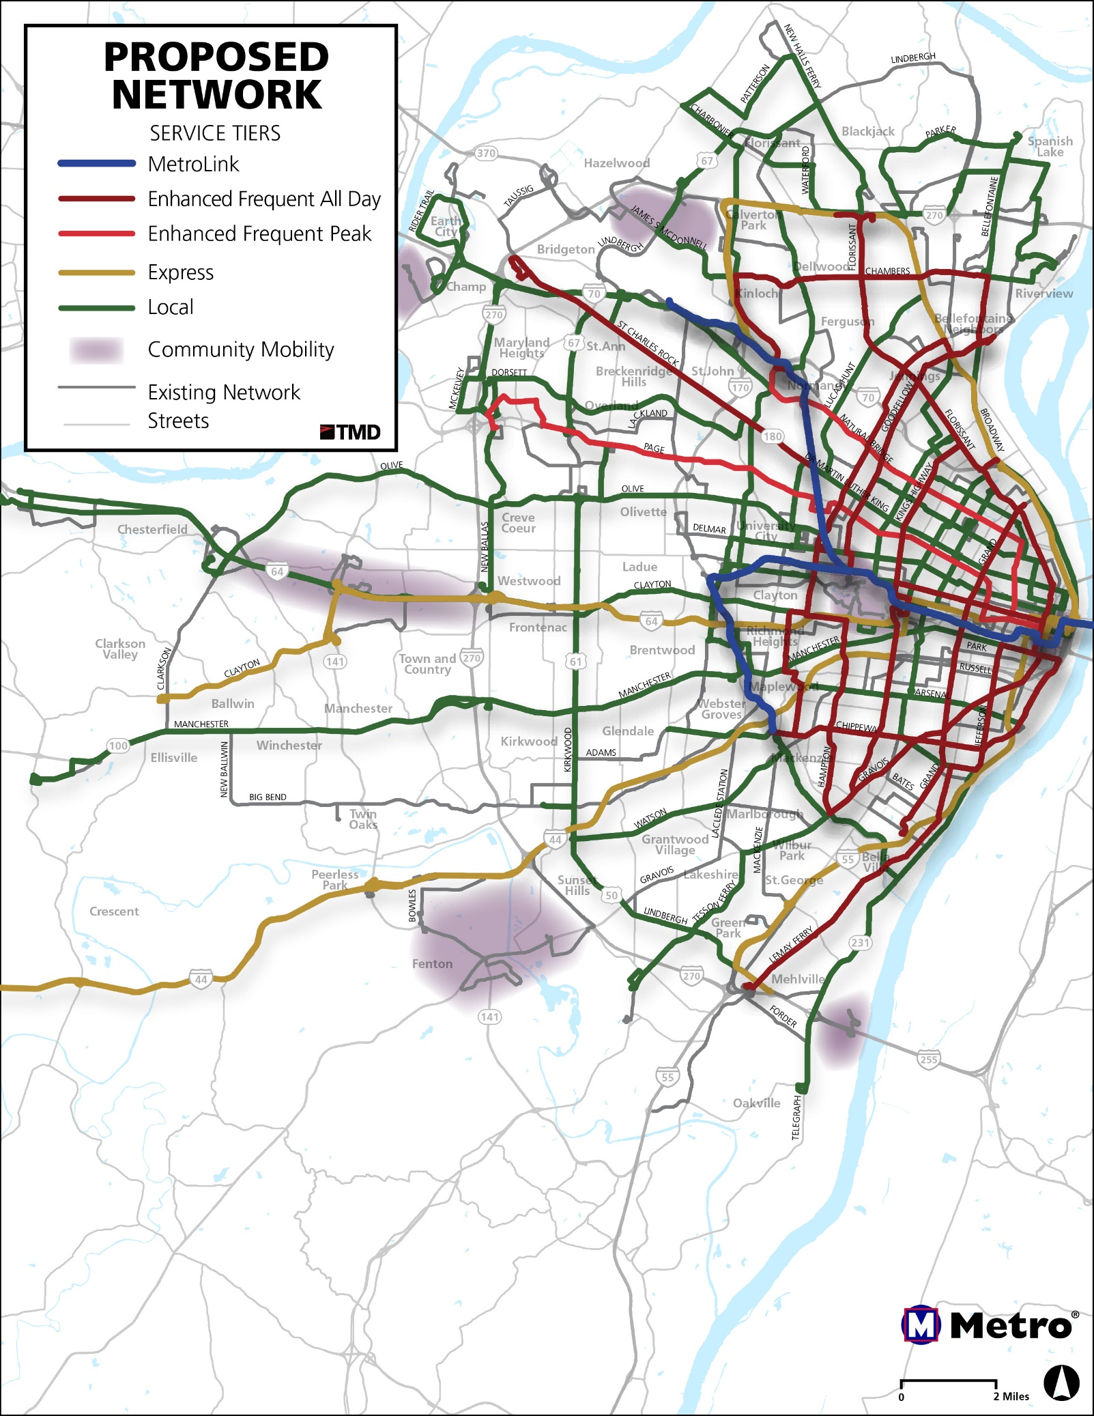 Bus routes around St. Louis could see overhaul as Metro seeks public feedback | Along for the ...